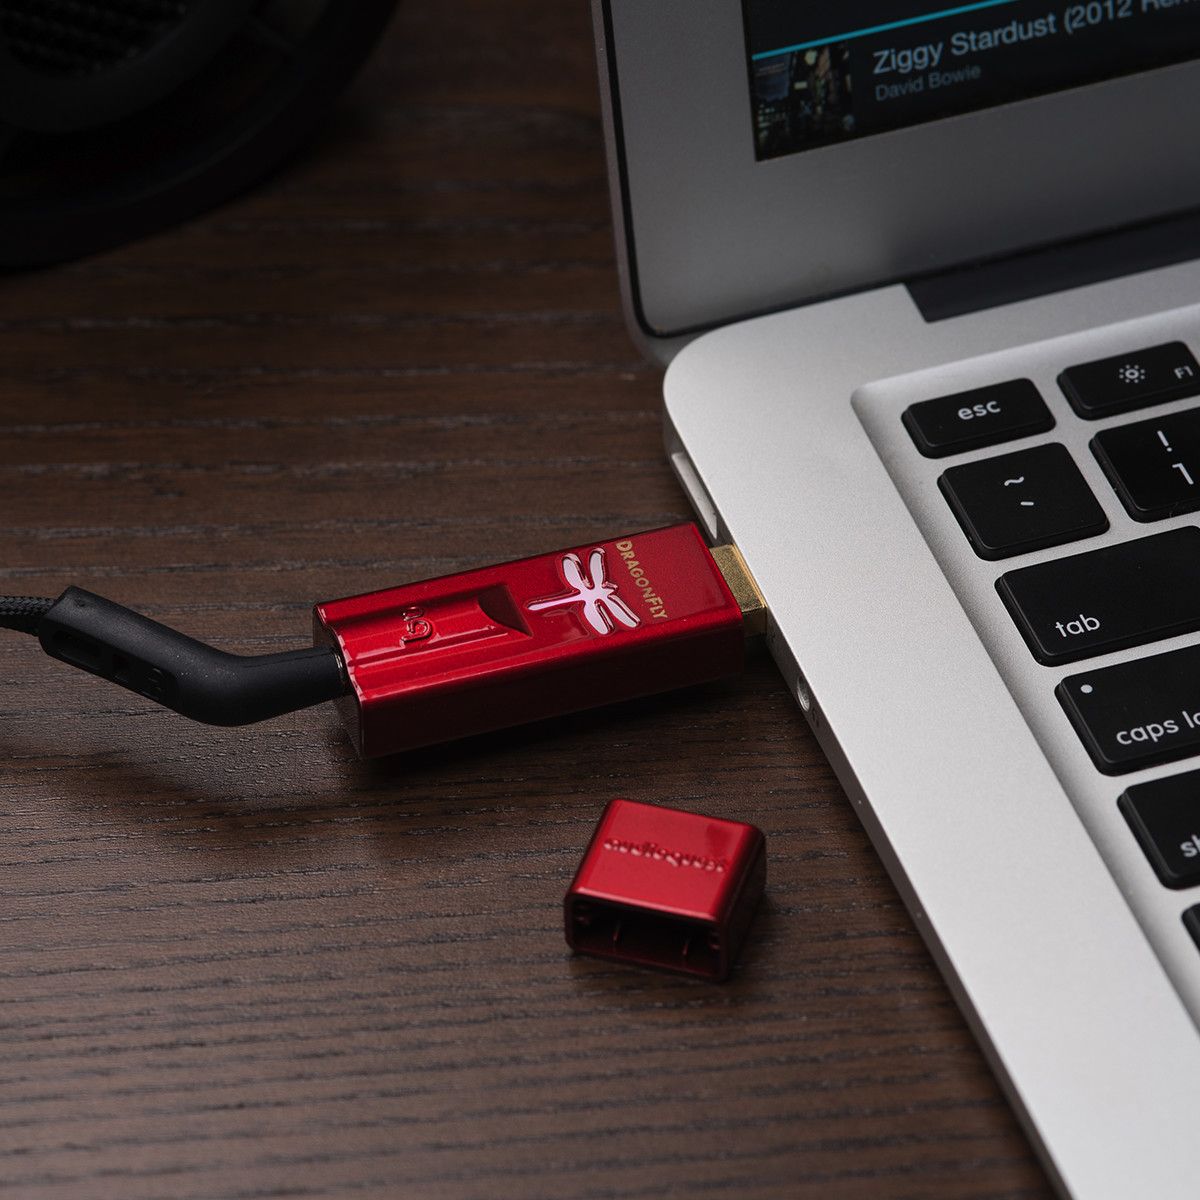 DragonFly Red plugged into computer USB